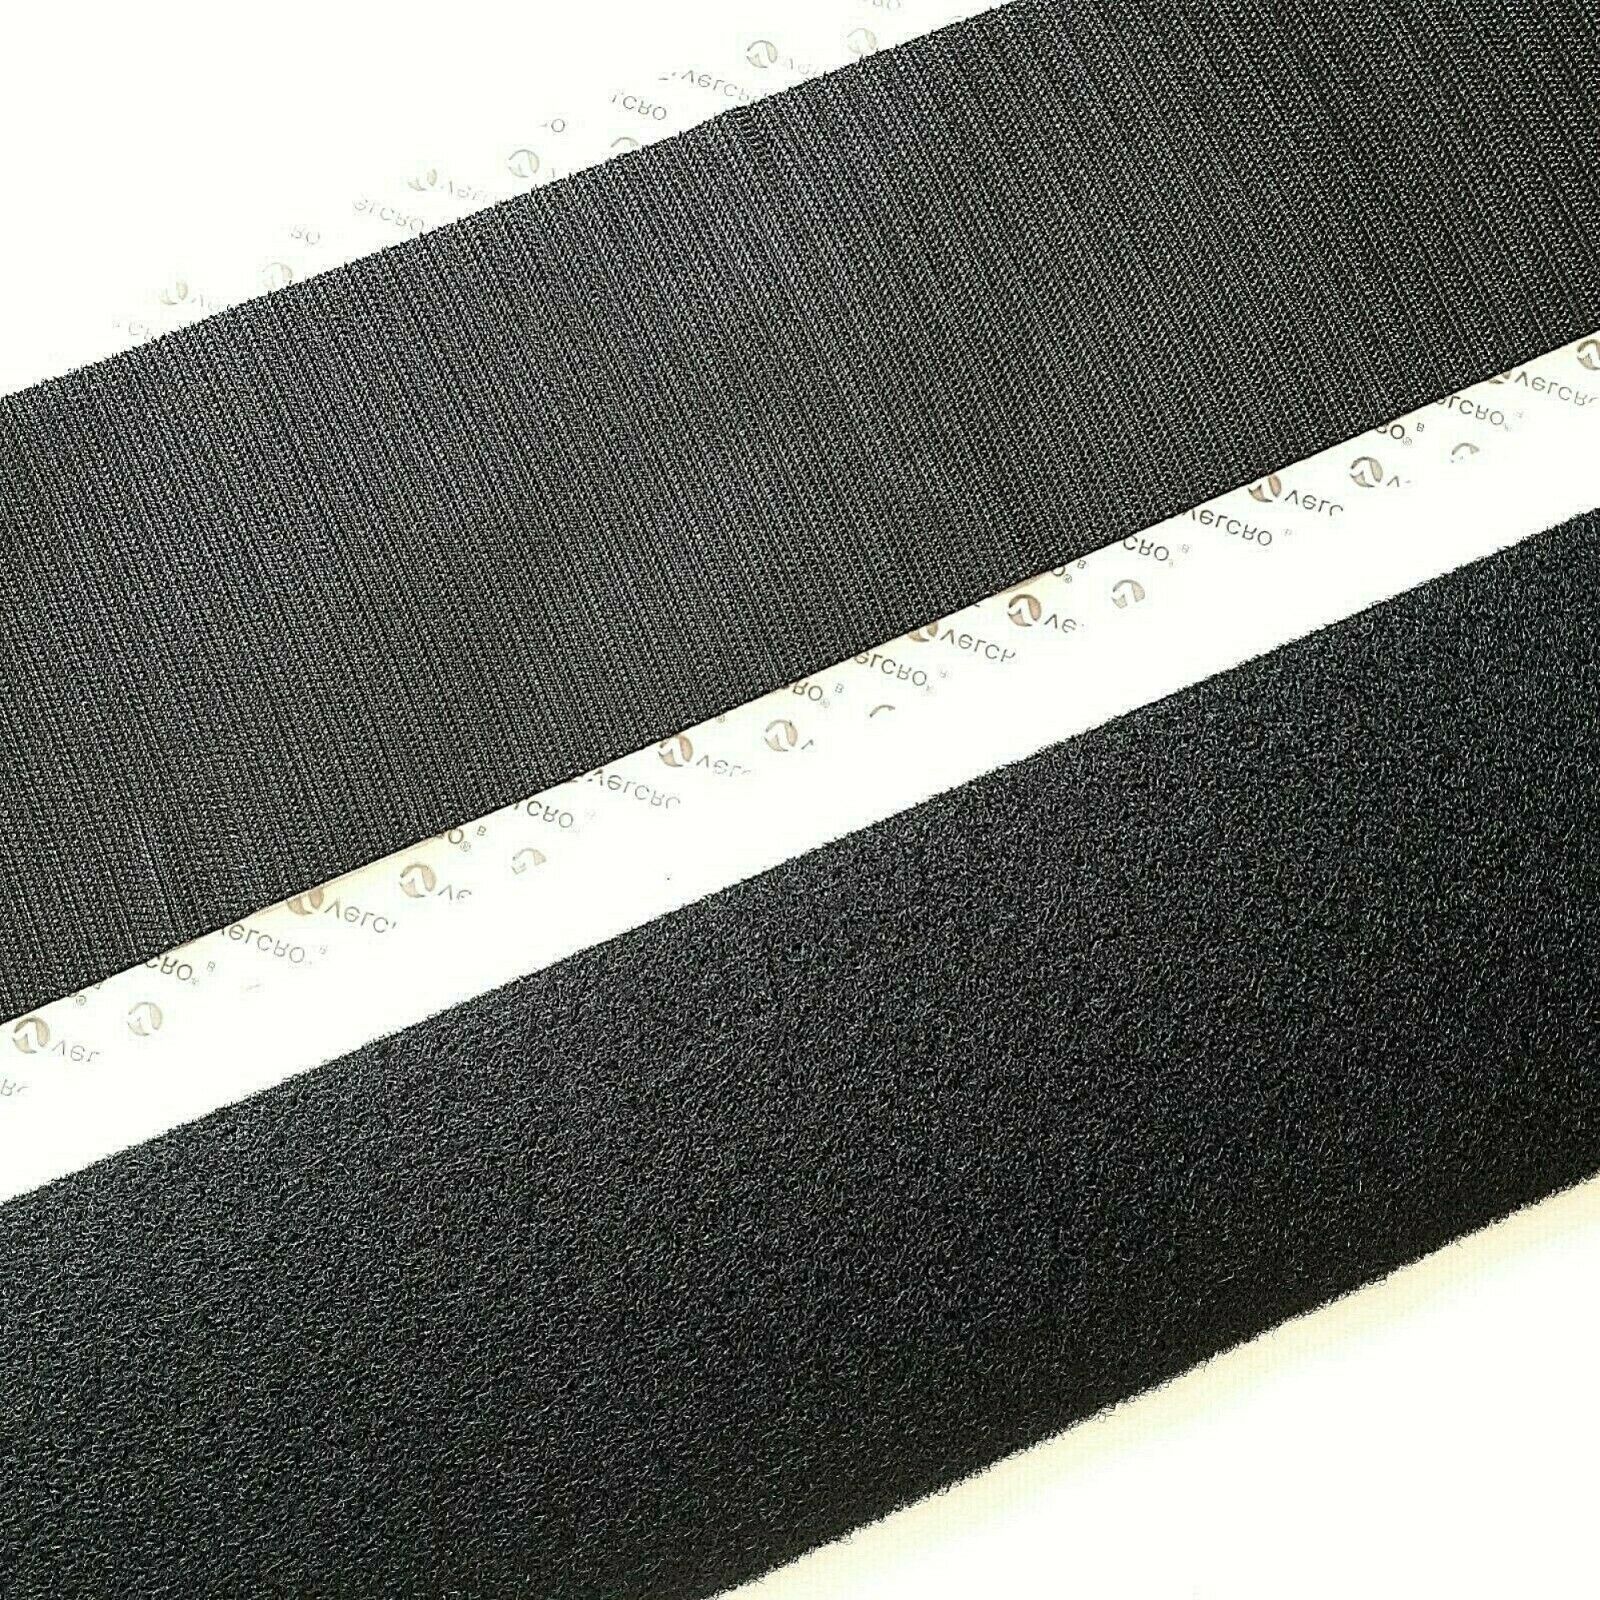 2" Wide VELCRO® Brand HIGH-TACK Self Adhesive Tape Strip Set - 36" in. Lengths